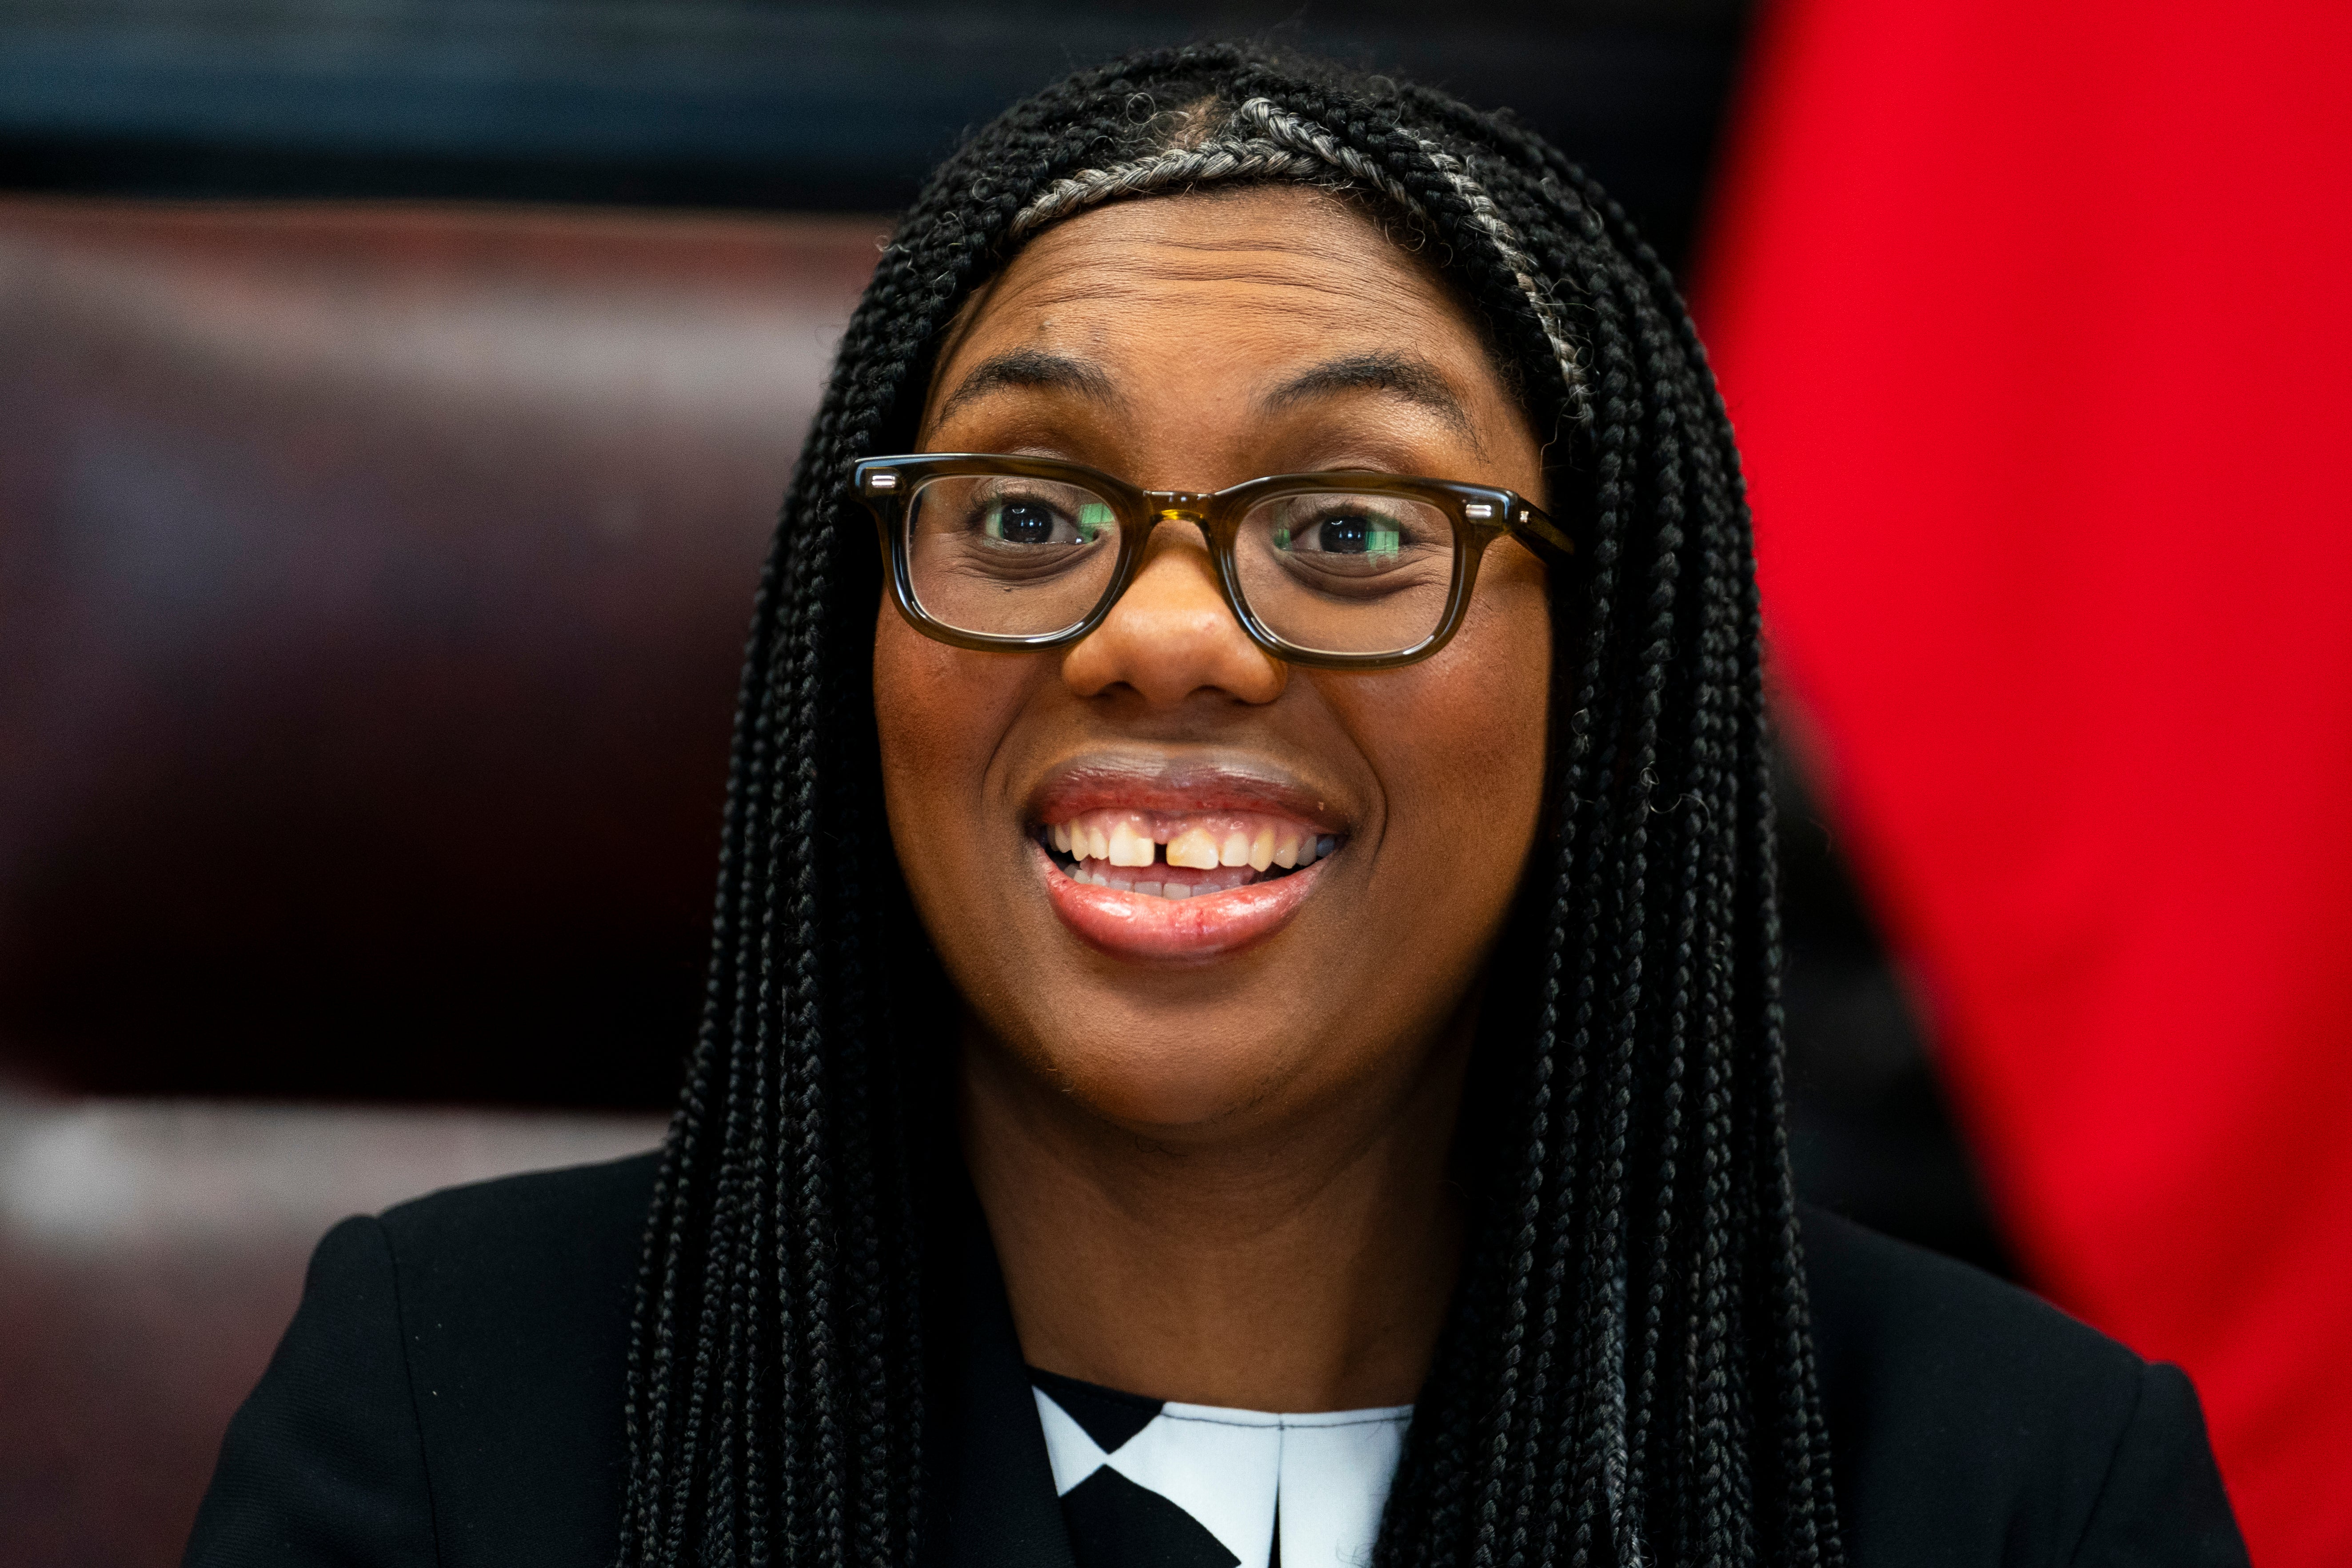 Kemi Badenoch is a favourite of the right wing of the party